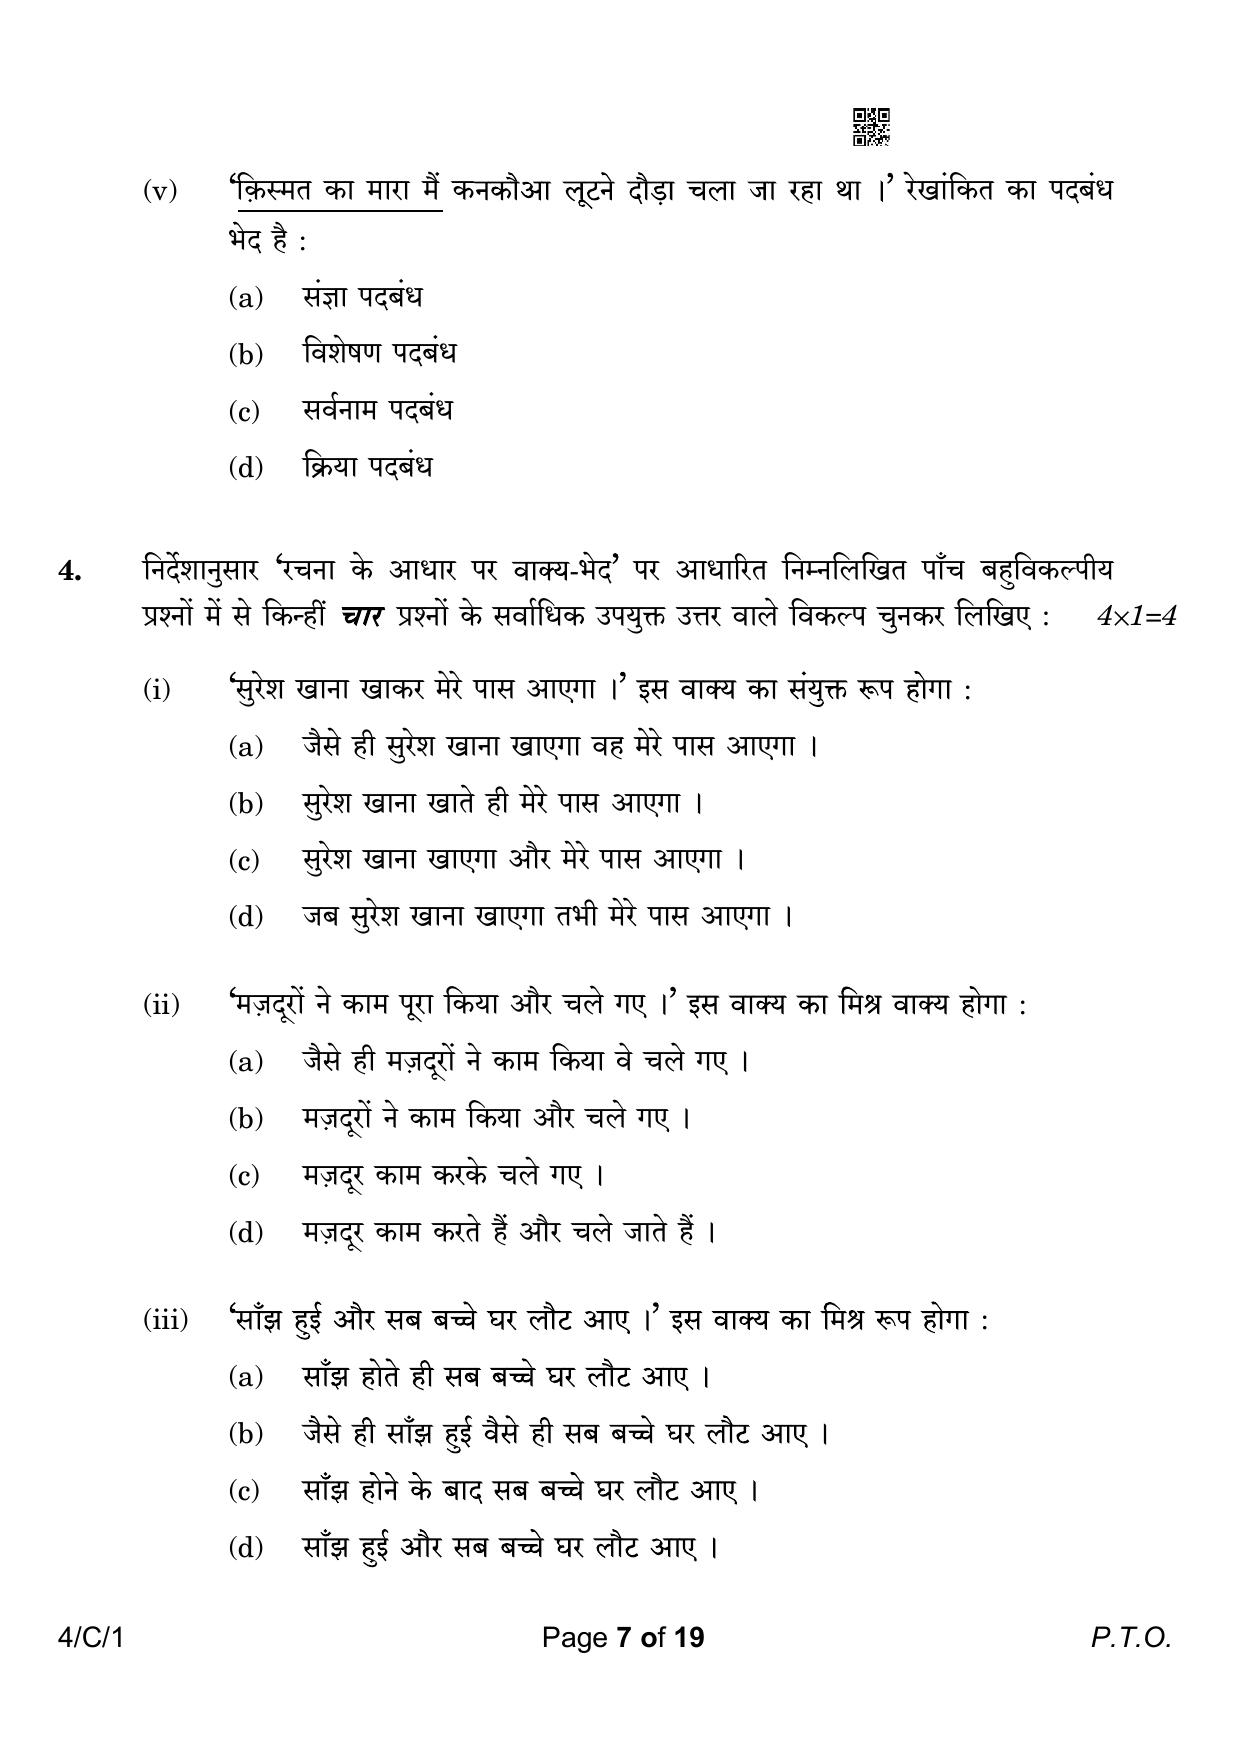 CBSE Class 10 4-1 Hindi B 2023 (Compartment) Question Paper - Page 7